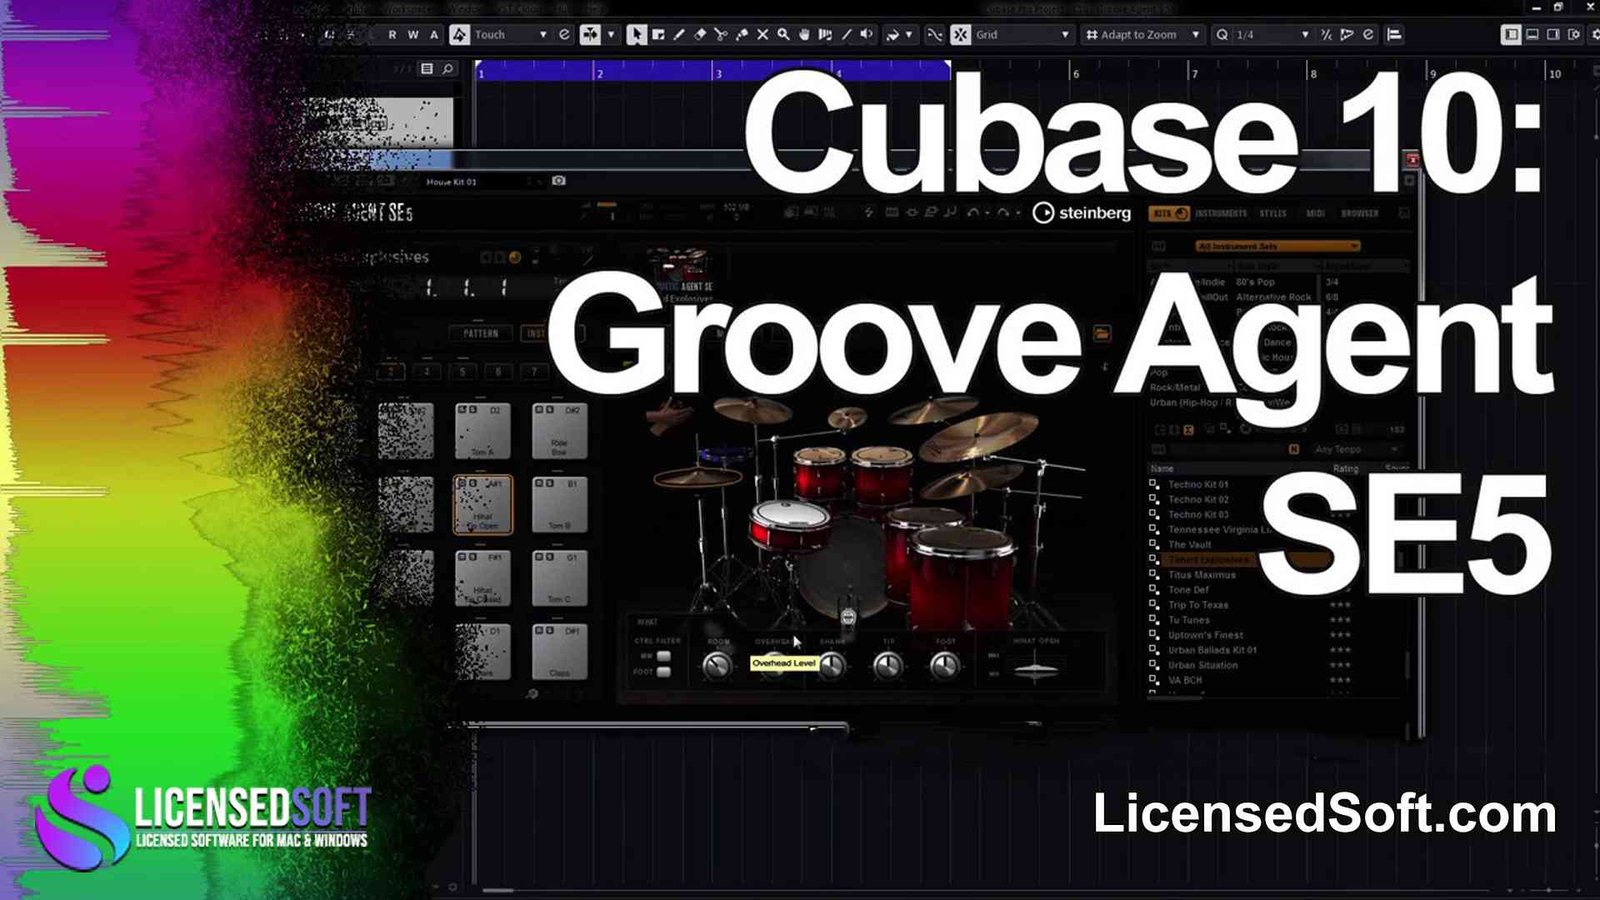 Steinberg Groove Agent 5 Perpetual License By LicensedSoft